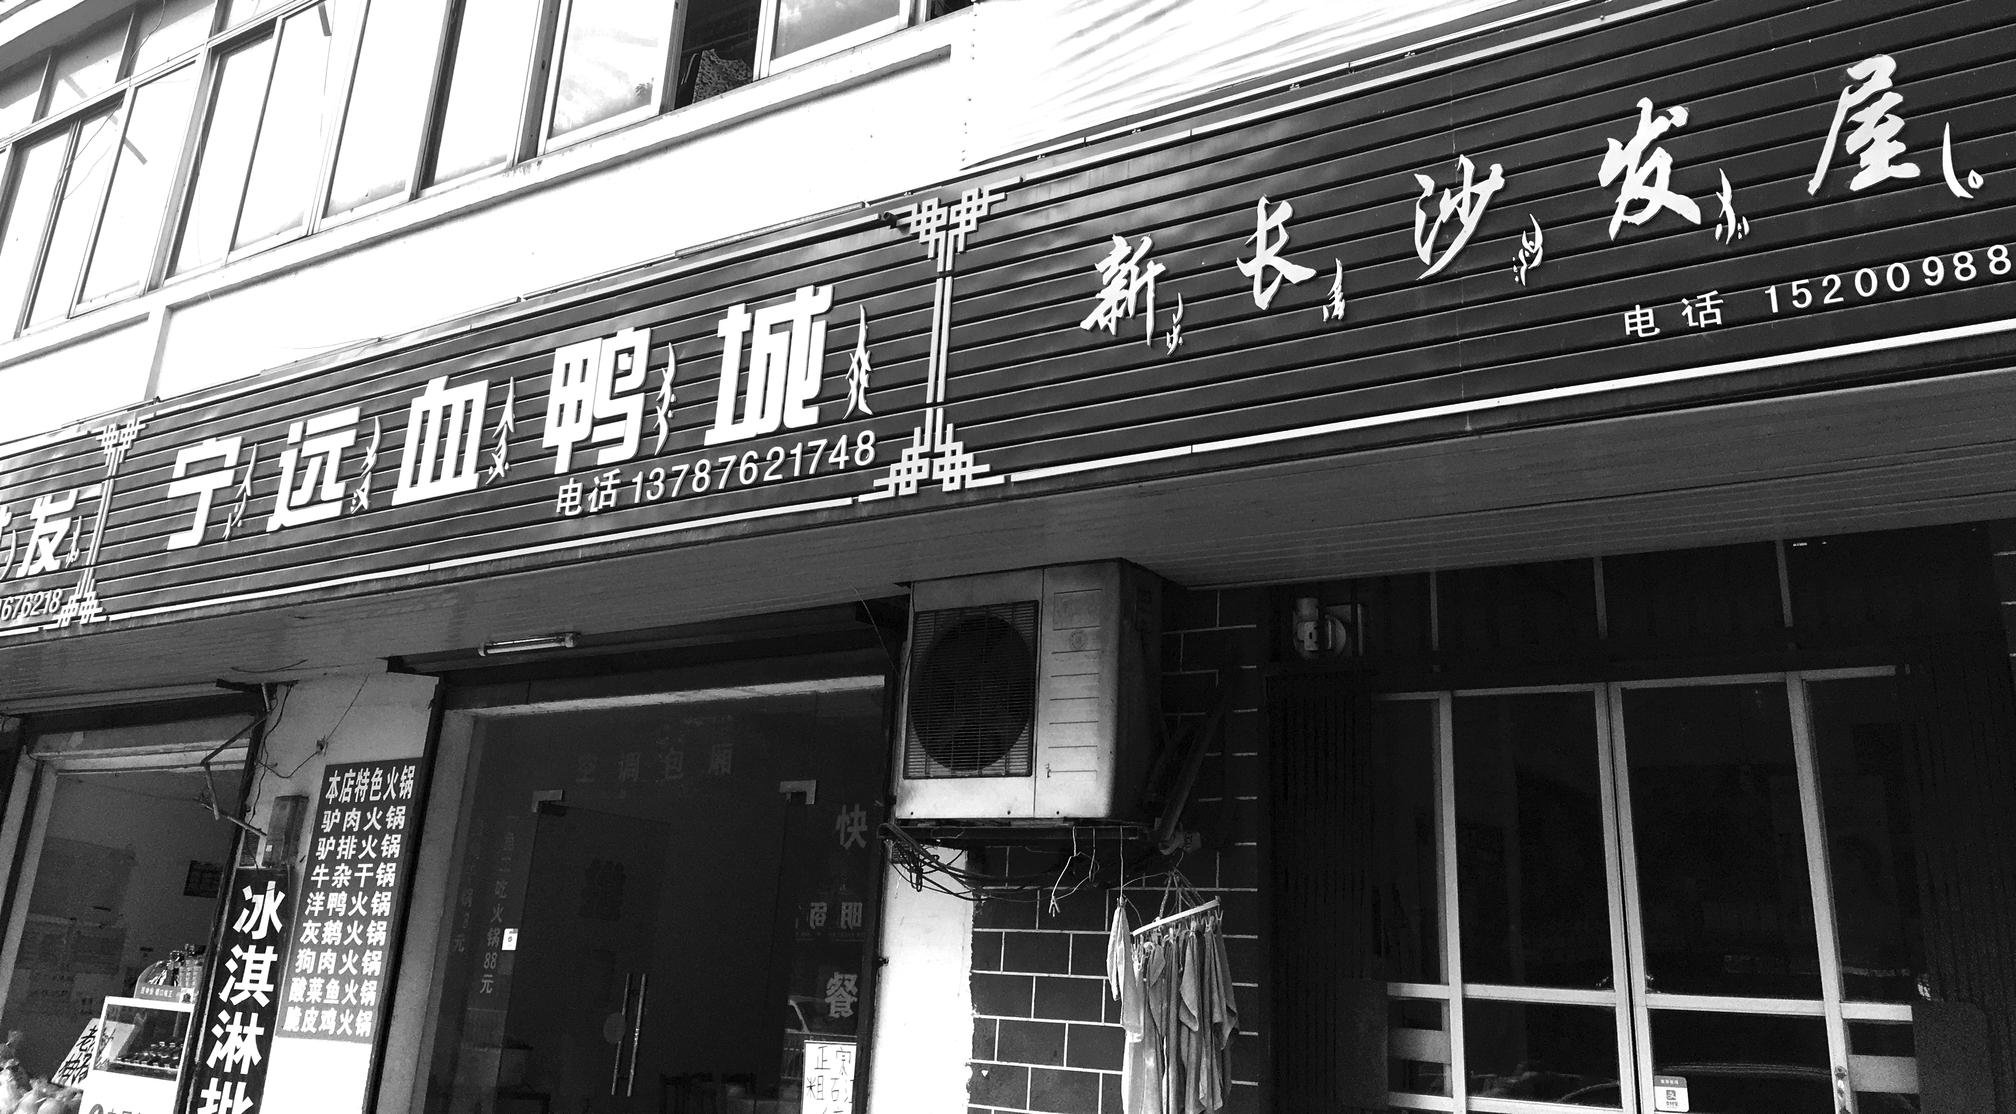 Picture of shop signs in Jiangyong city with Chinese names and their corresponding Nüshu characters.